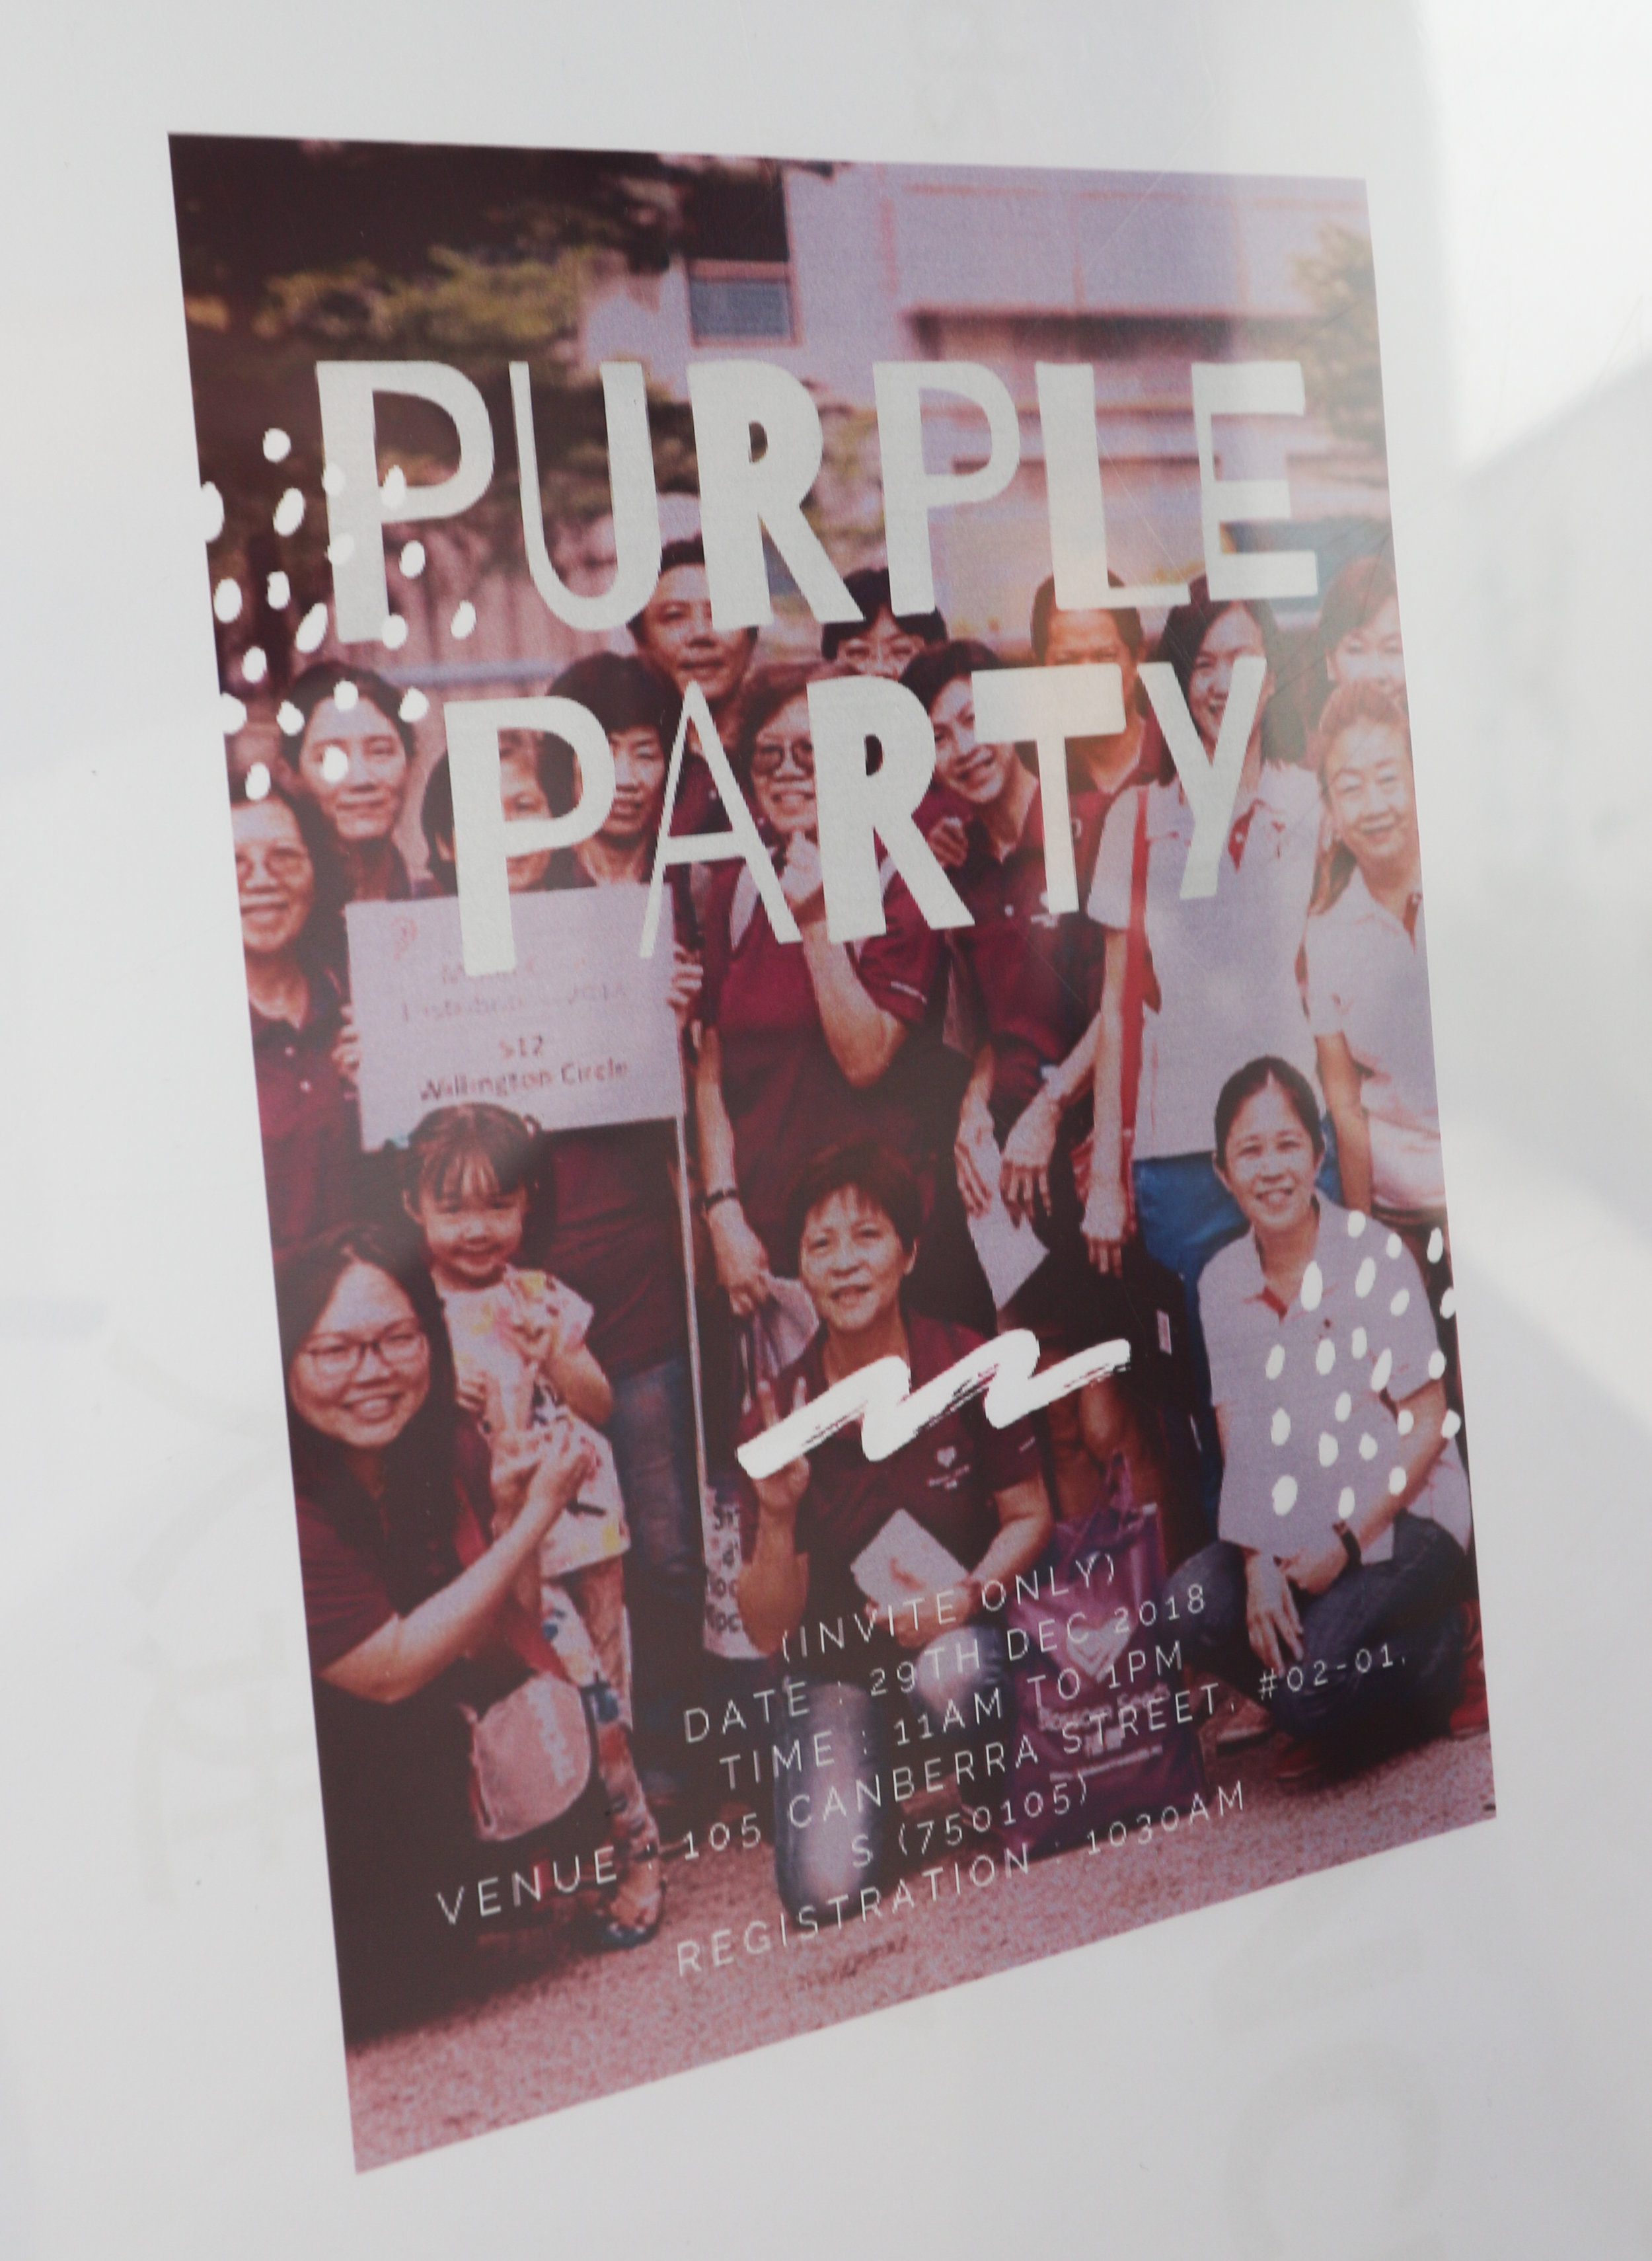 Blossom Seeds Care Centre - Open House and Purple Party Volunteer Appreciation